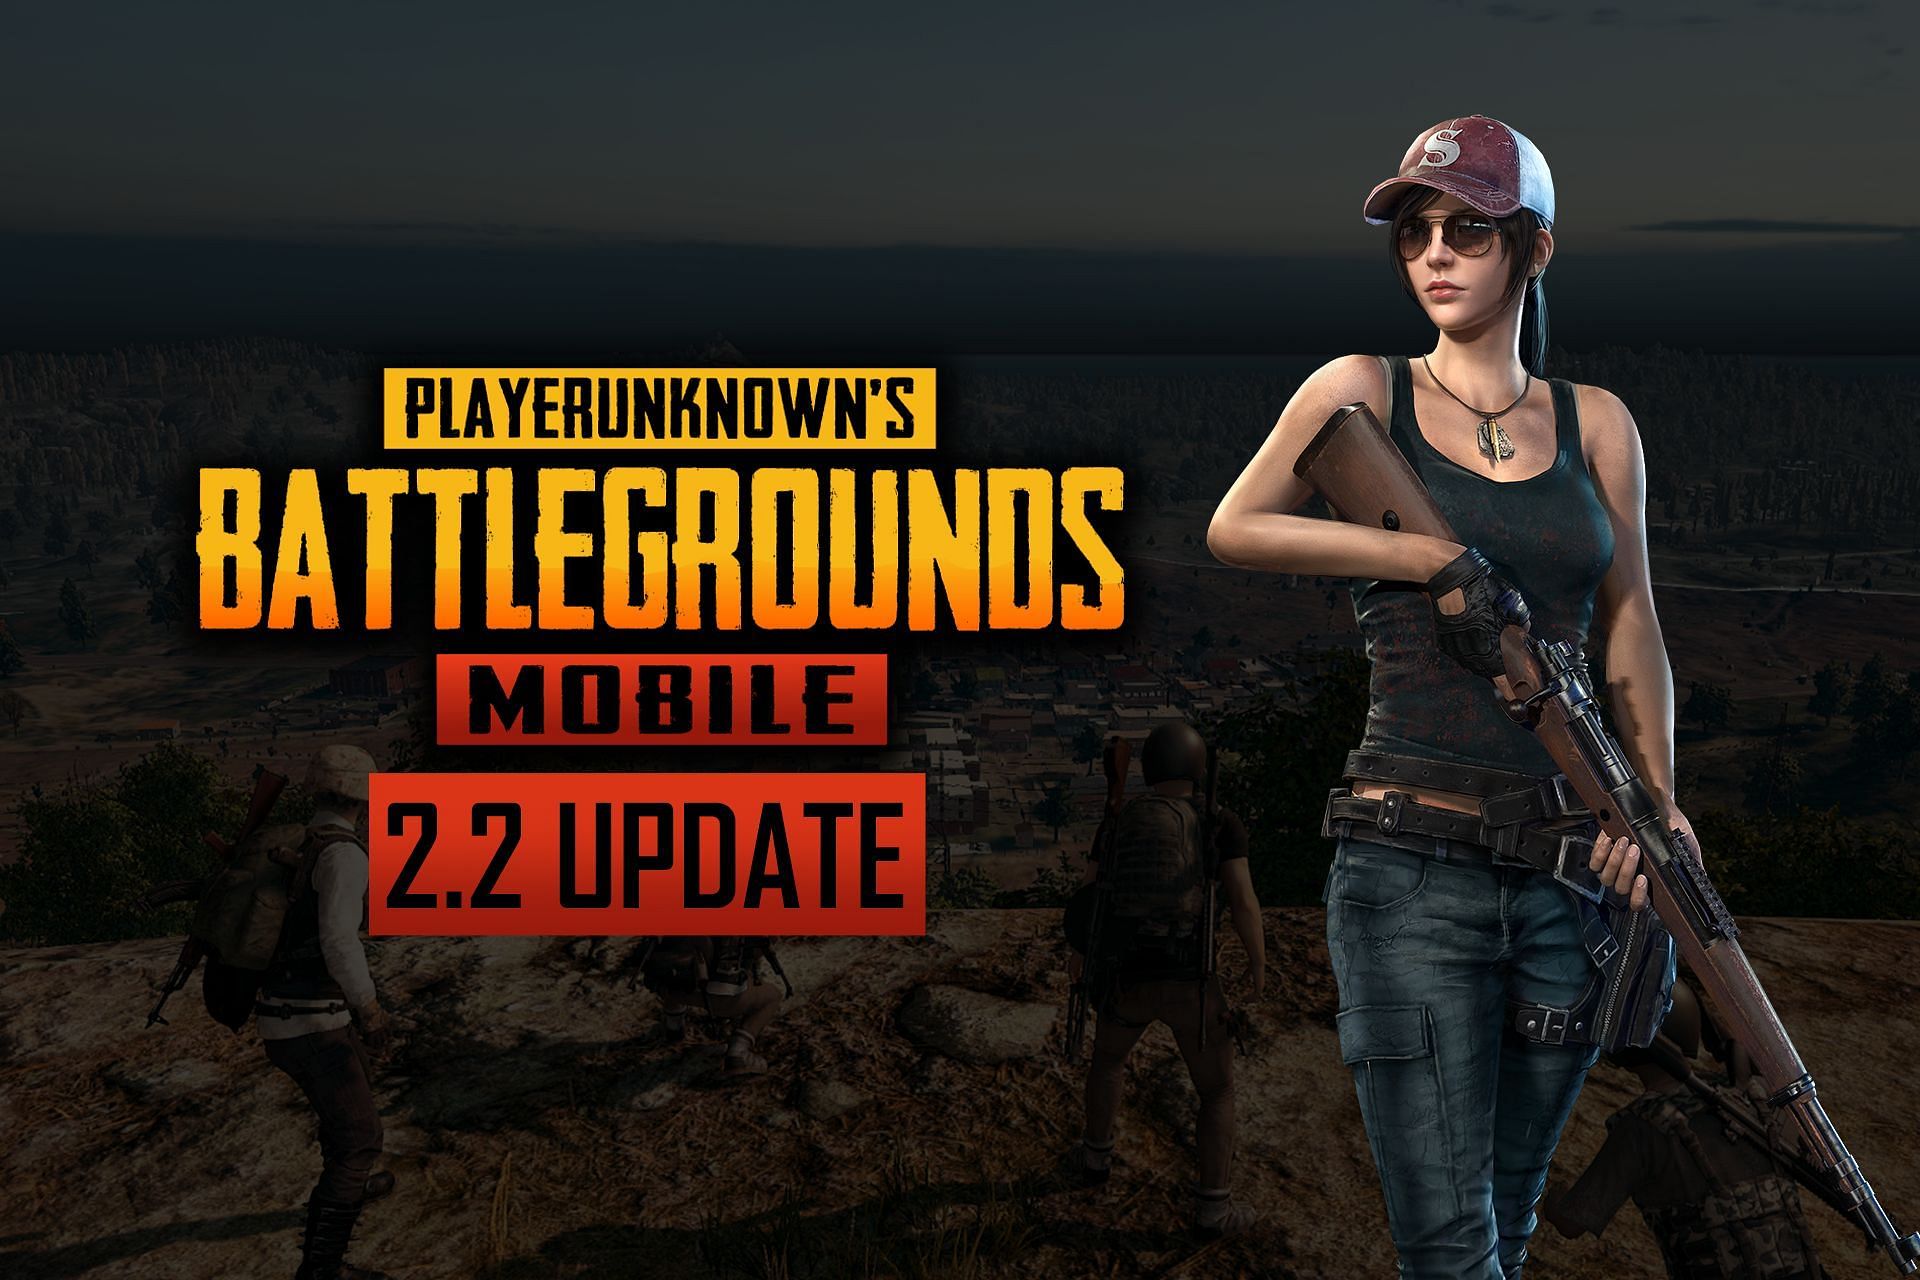 PUBG Mobile 2.2 update can be downloaded using the APK on the official website (Image via Sportskeeda)